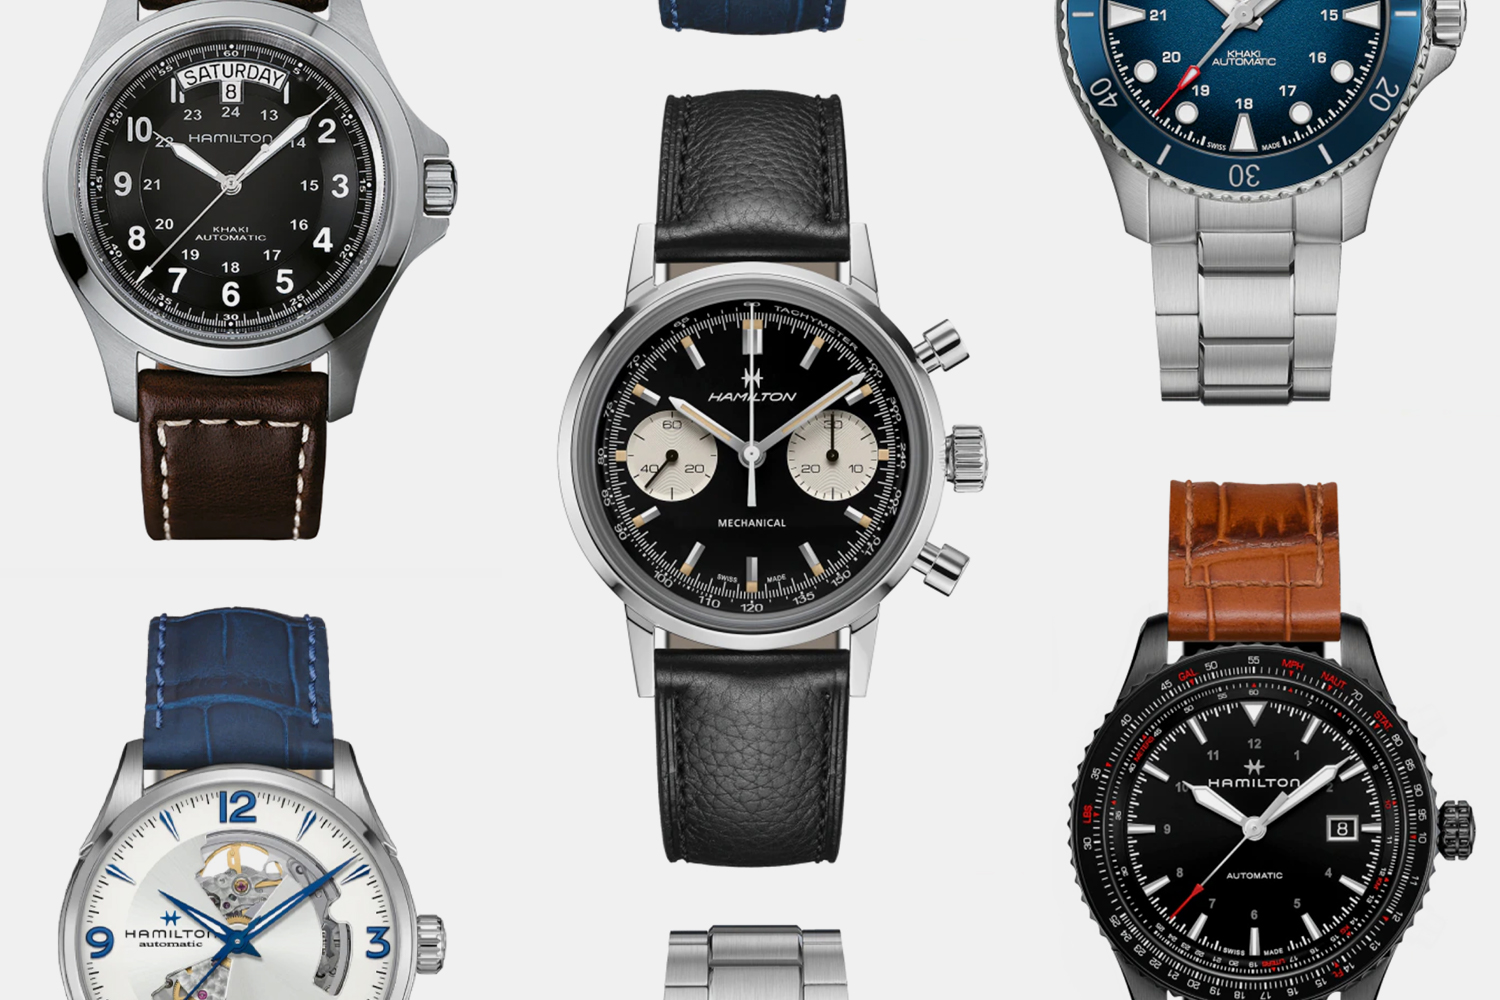 The Ultimate Father’s Day Gift? A Watch That’ll Last Forever.